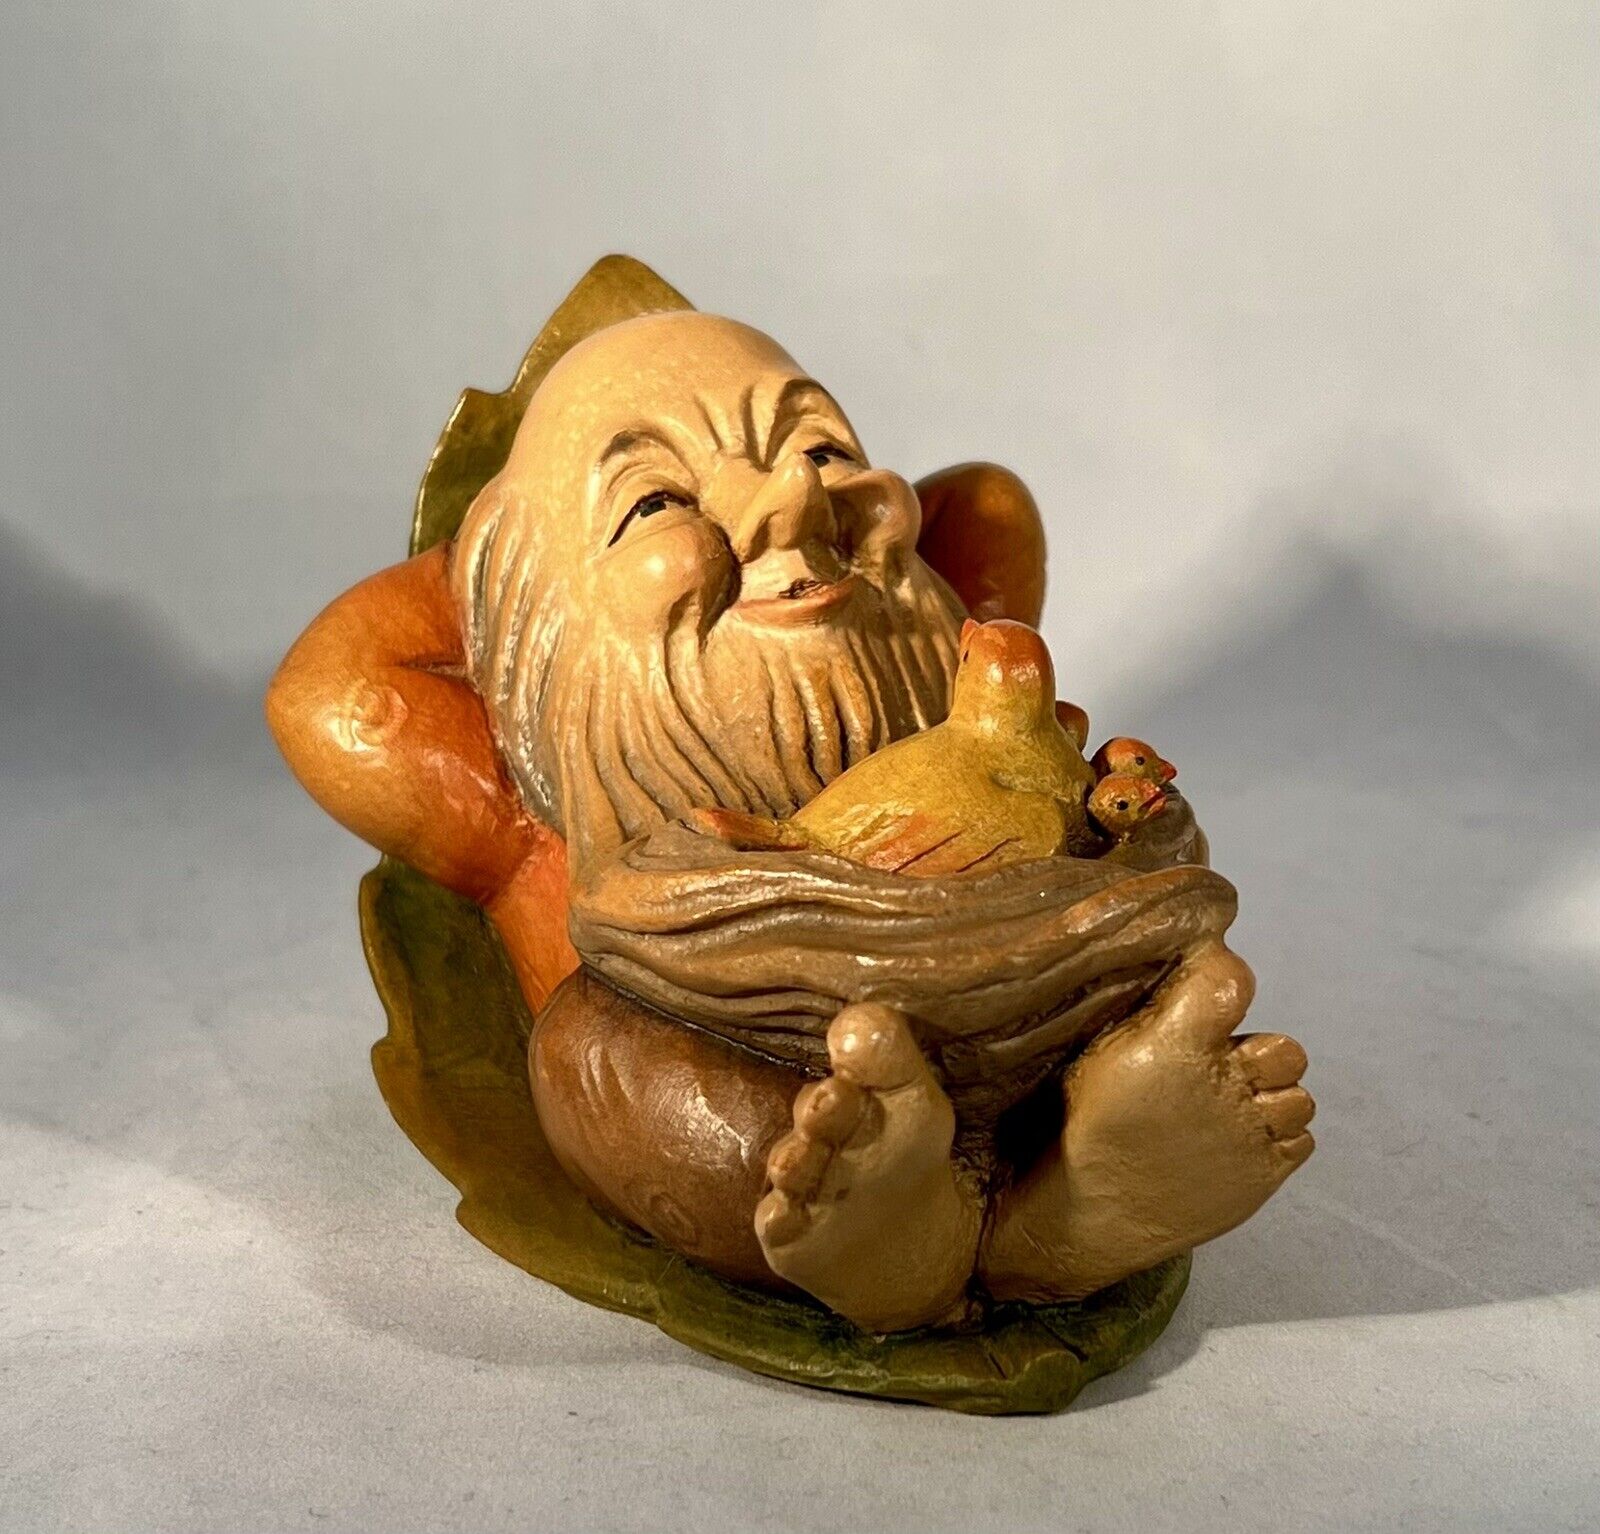 Anri Hand Carved The Happy One The Little Folks of the Salvans Italy 7”Vtg Troll